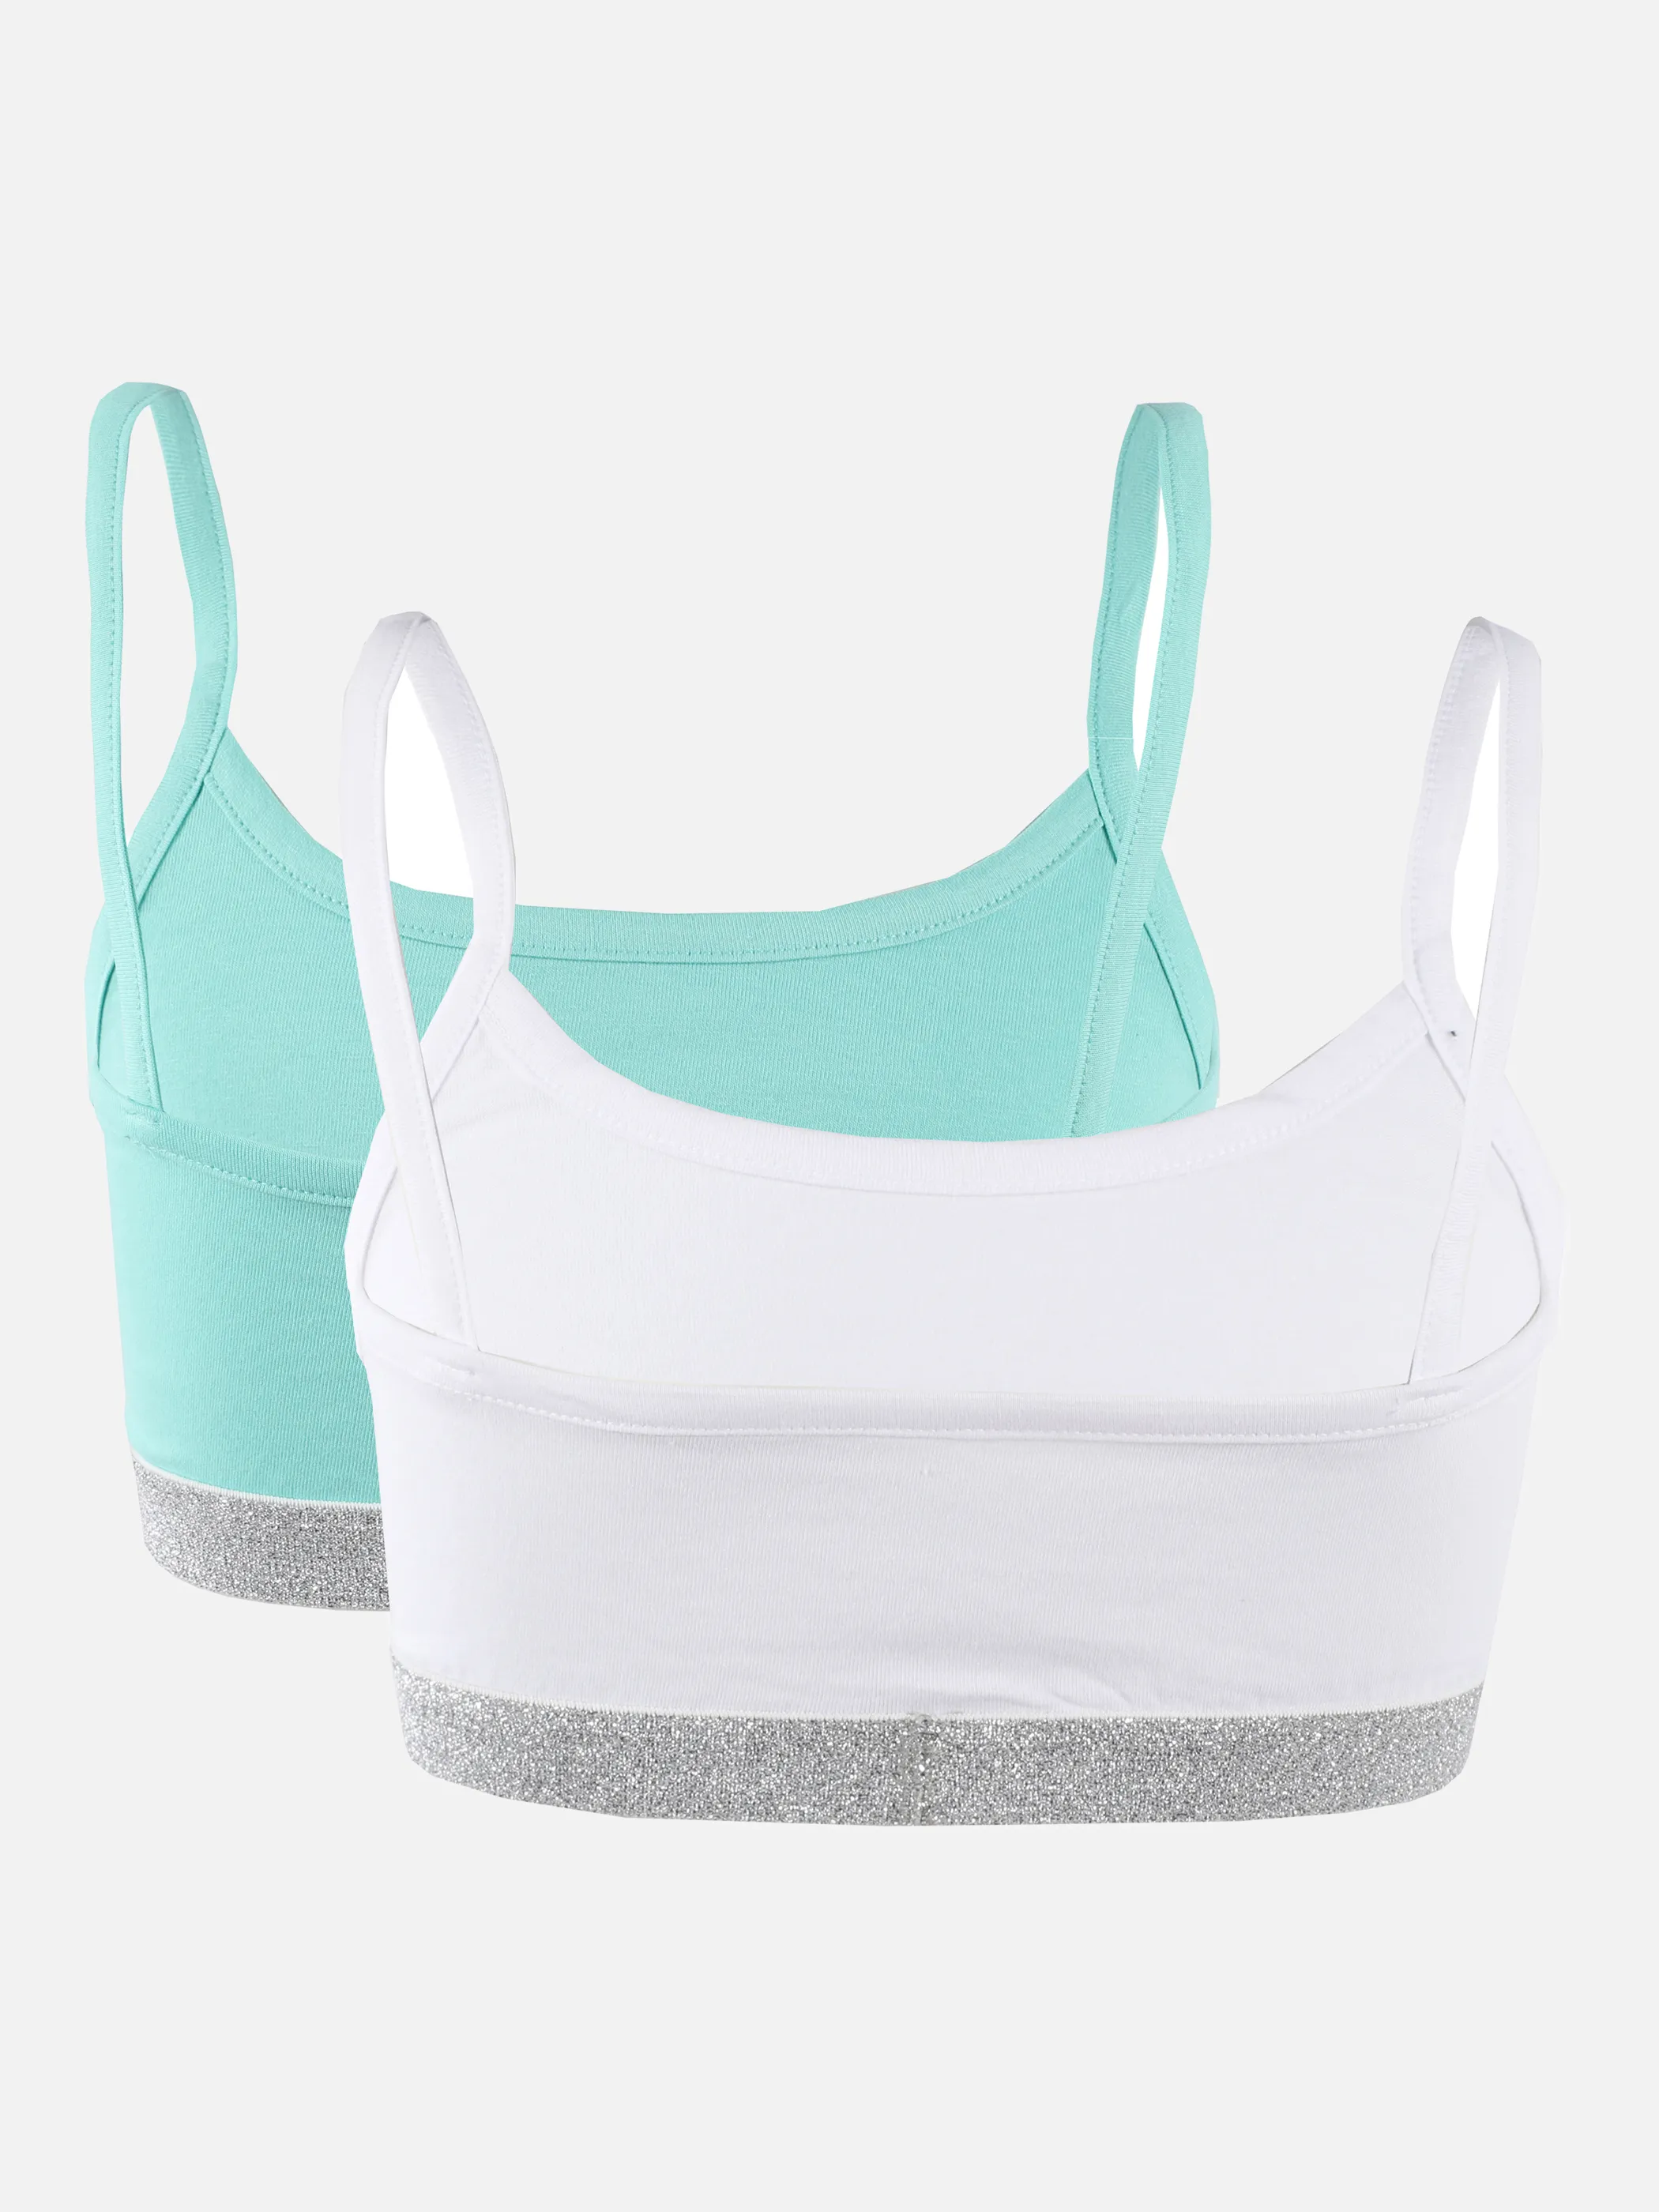 Stop + Go TG Bustier 2er Pack Weiß 873693 WHITE/MINT 2